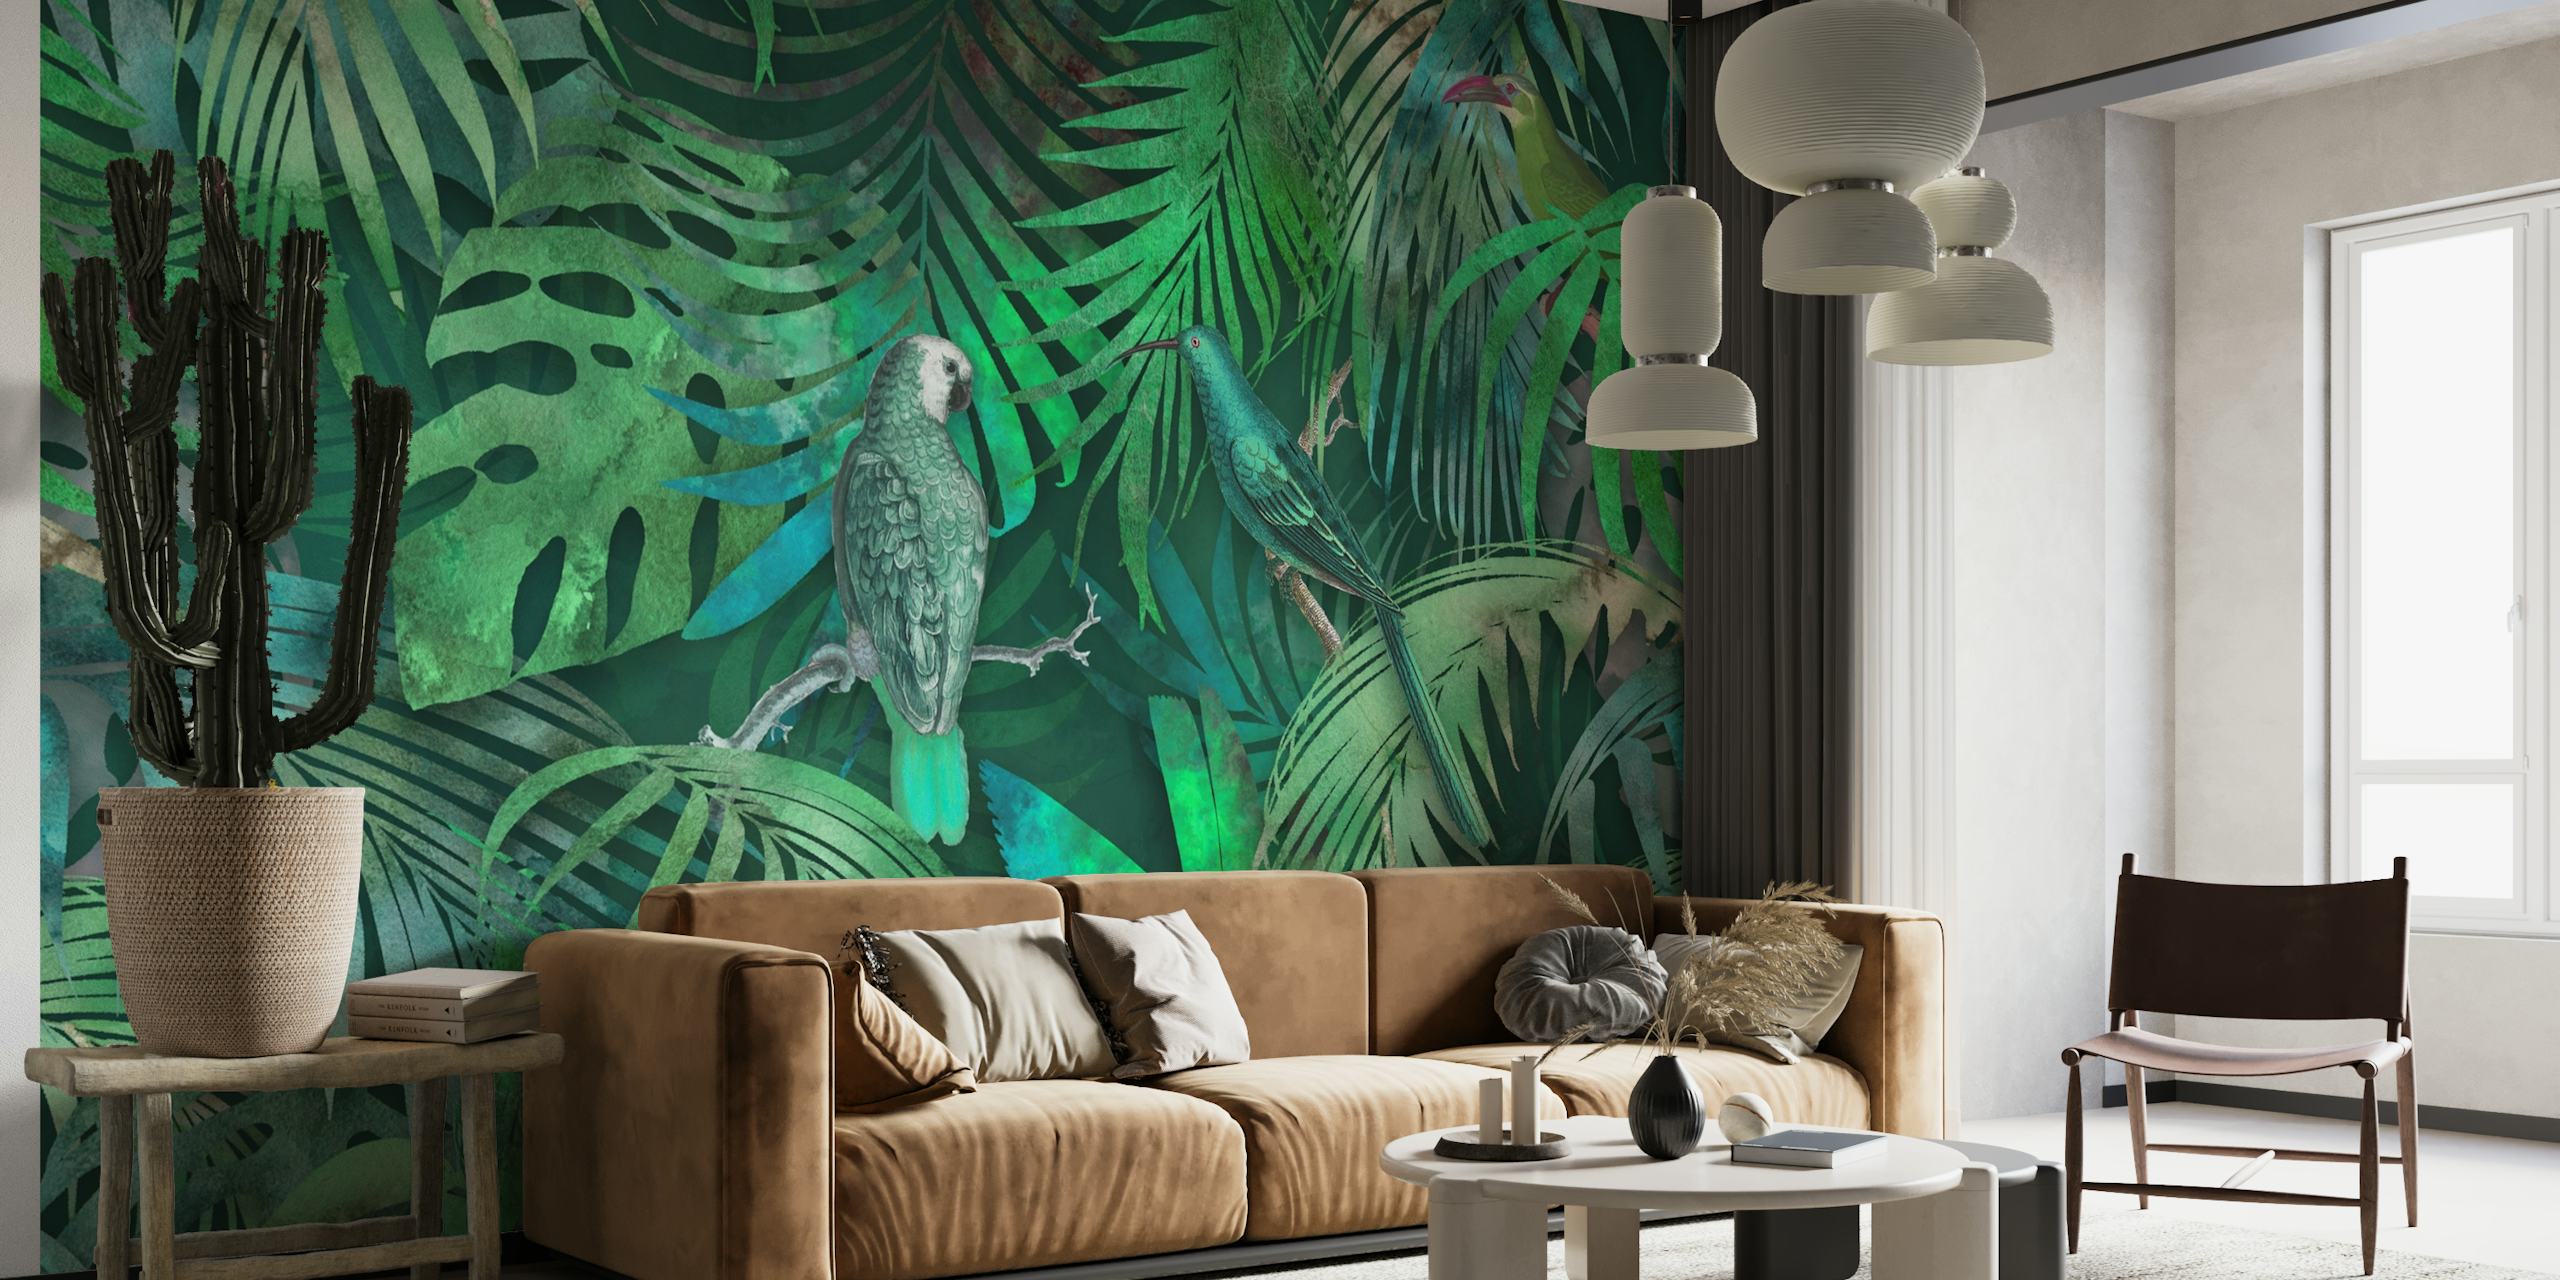 A verdant wall mural with parrots hidden among tropical leaves